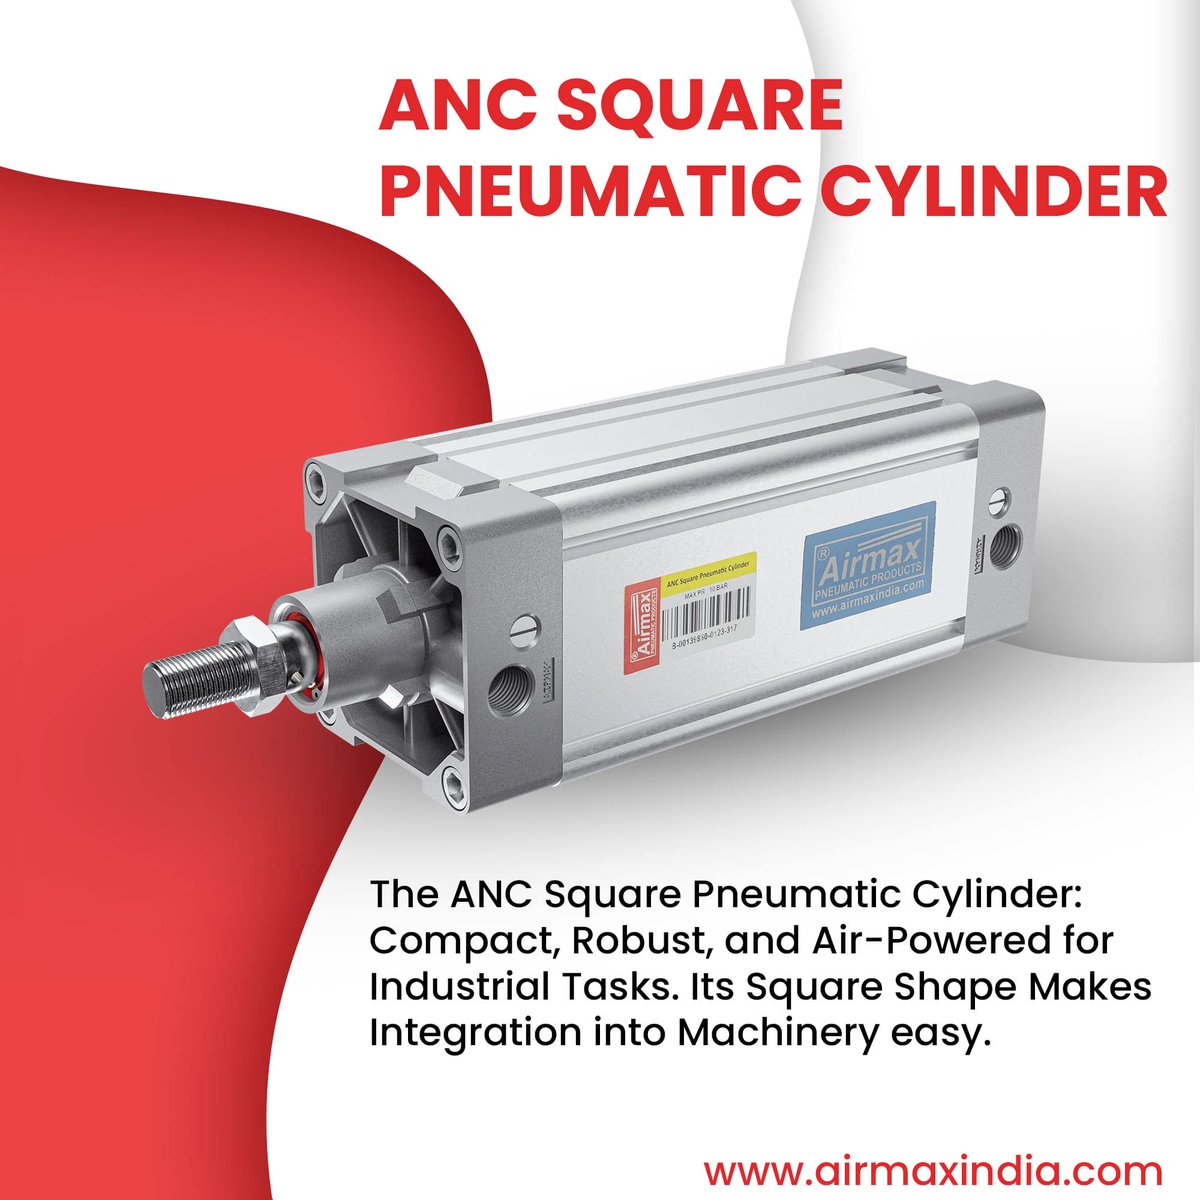 Presenting ANC Square Pneumatic Cylinder by Airmax Pneumatics: Compact, robust, and versatile. Perfect for industrial tasks.

#airmaxpneumatics #Manufacturer #Exporter #Technology #MakeInIndia #G20 #India #Viral #trending #instagram #post #Explore